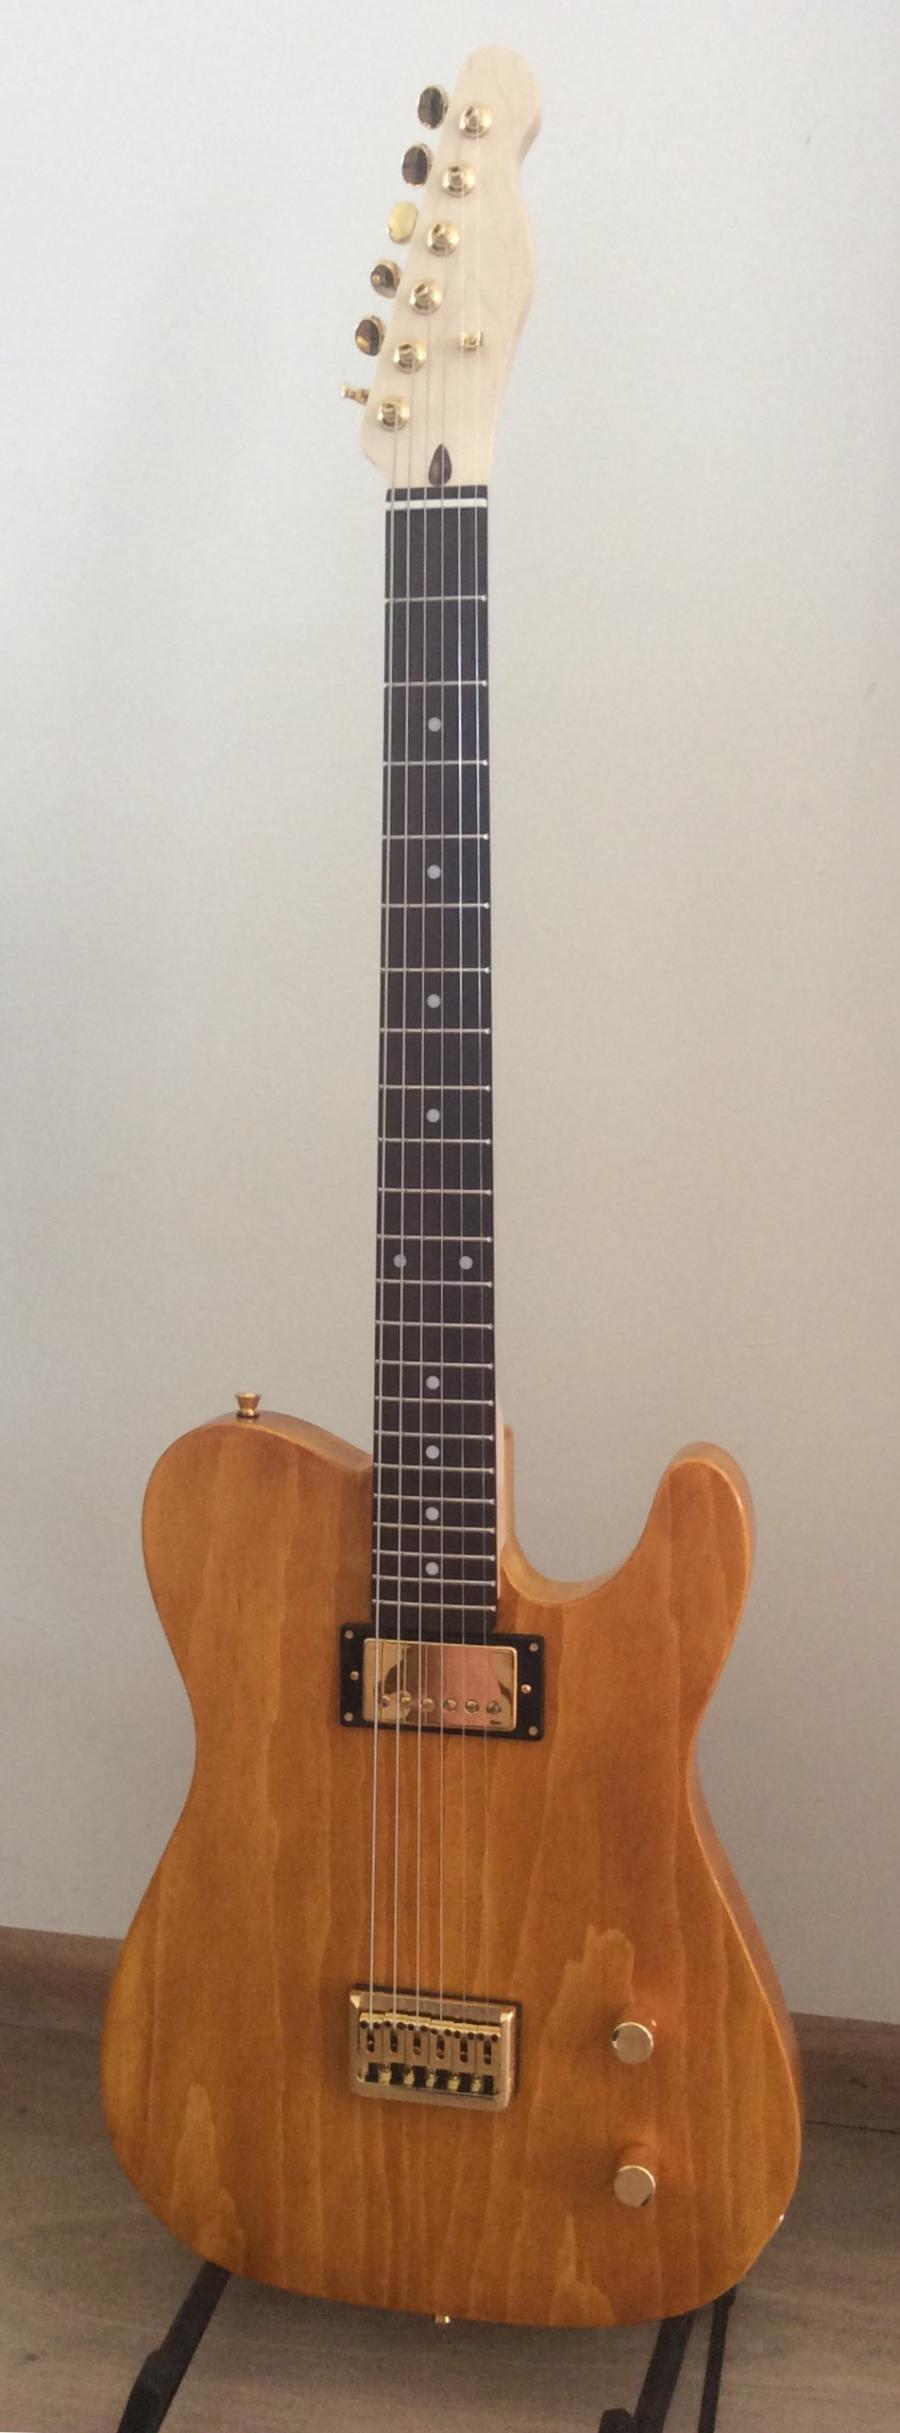 Telecaster Love Thread, No Archtops Allowed-image-jpg